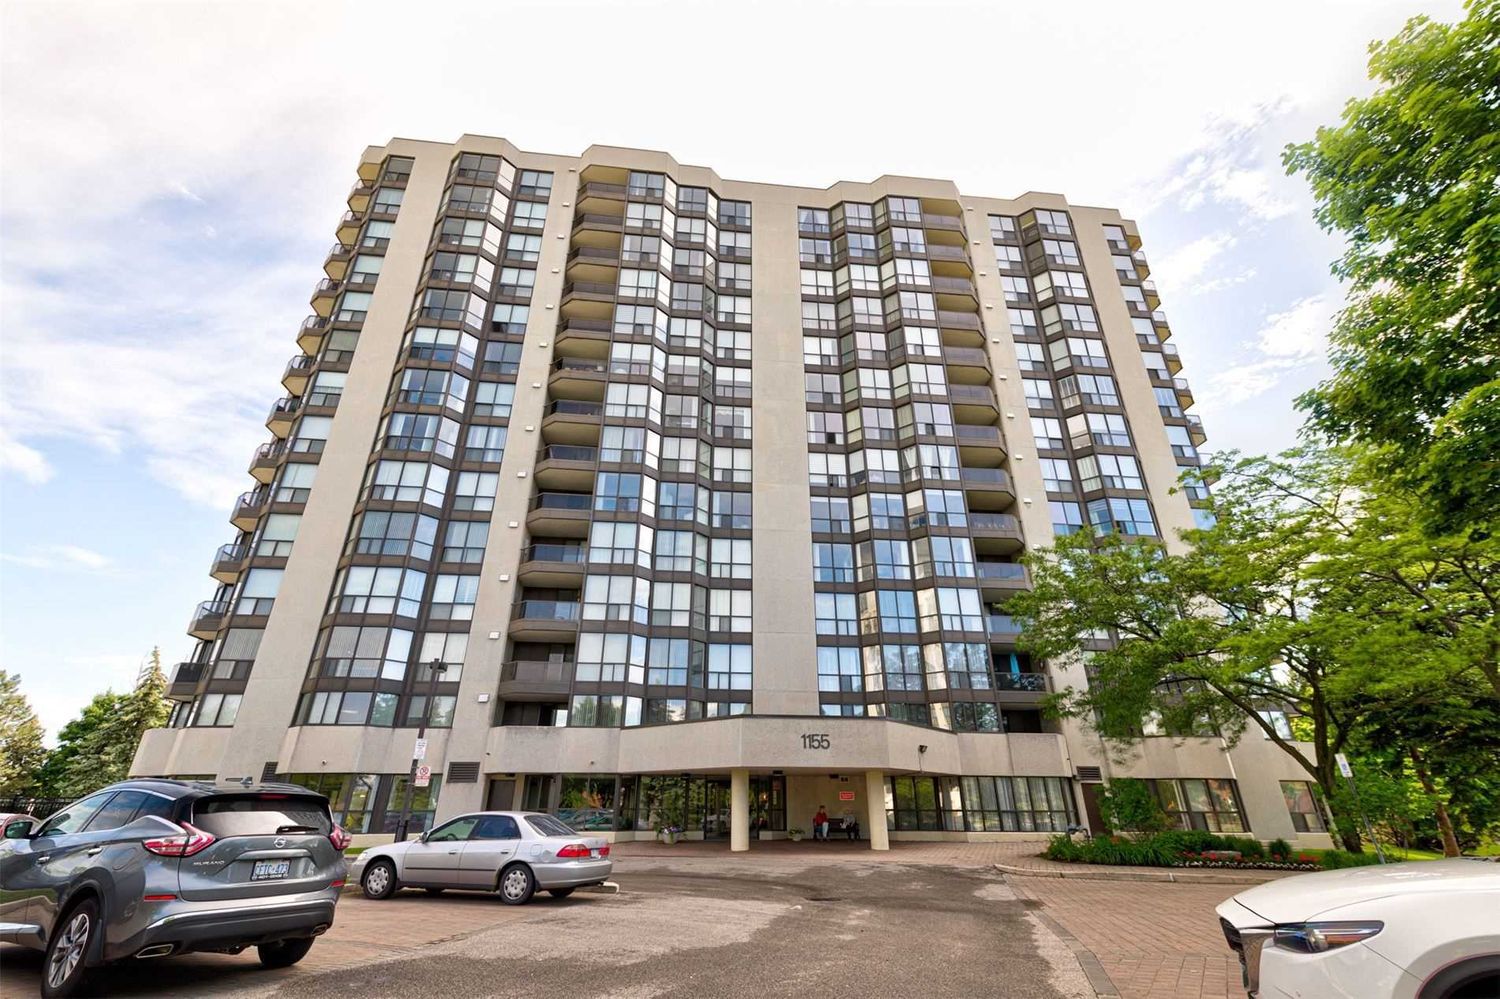 1155 Bough Beeches Boulevard. Orchard Place II Condos is located in  Mississauga, Toronto - image #2 of 2